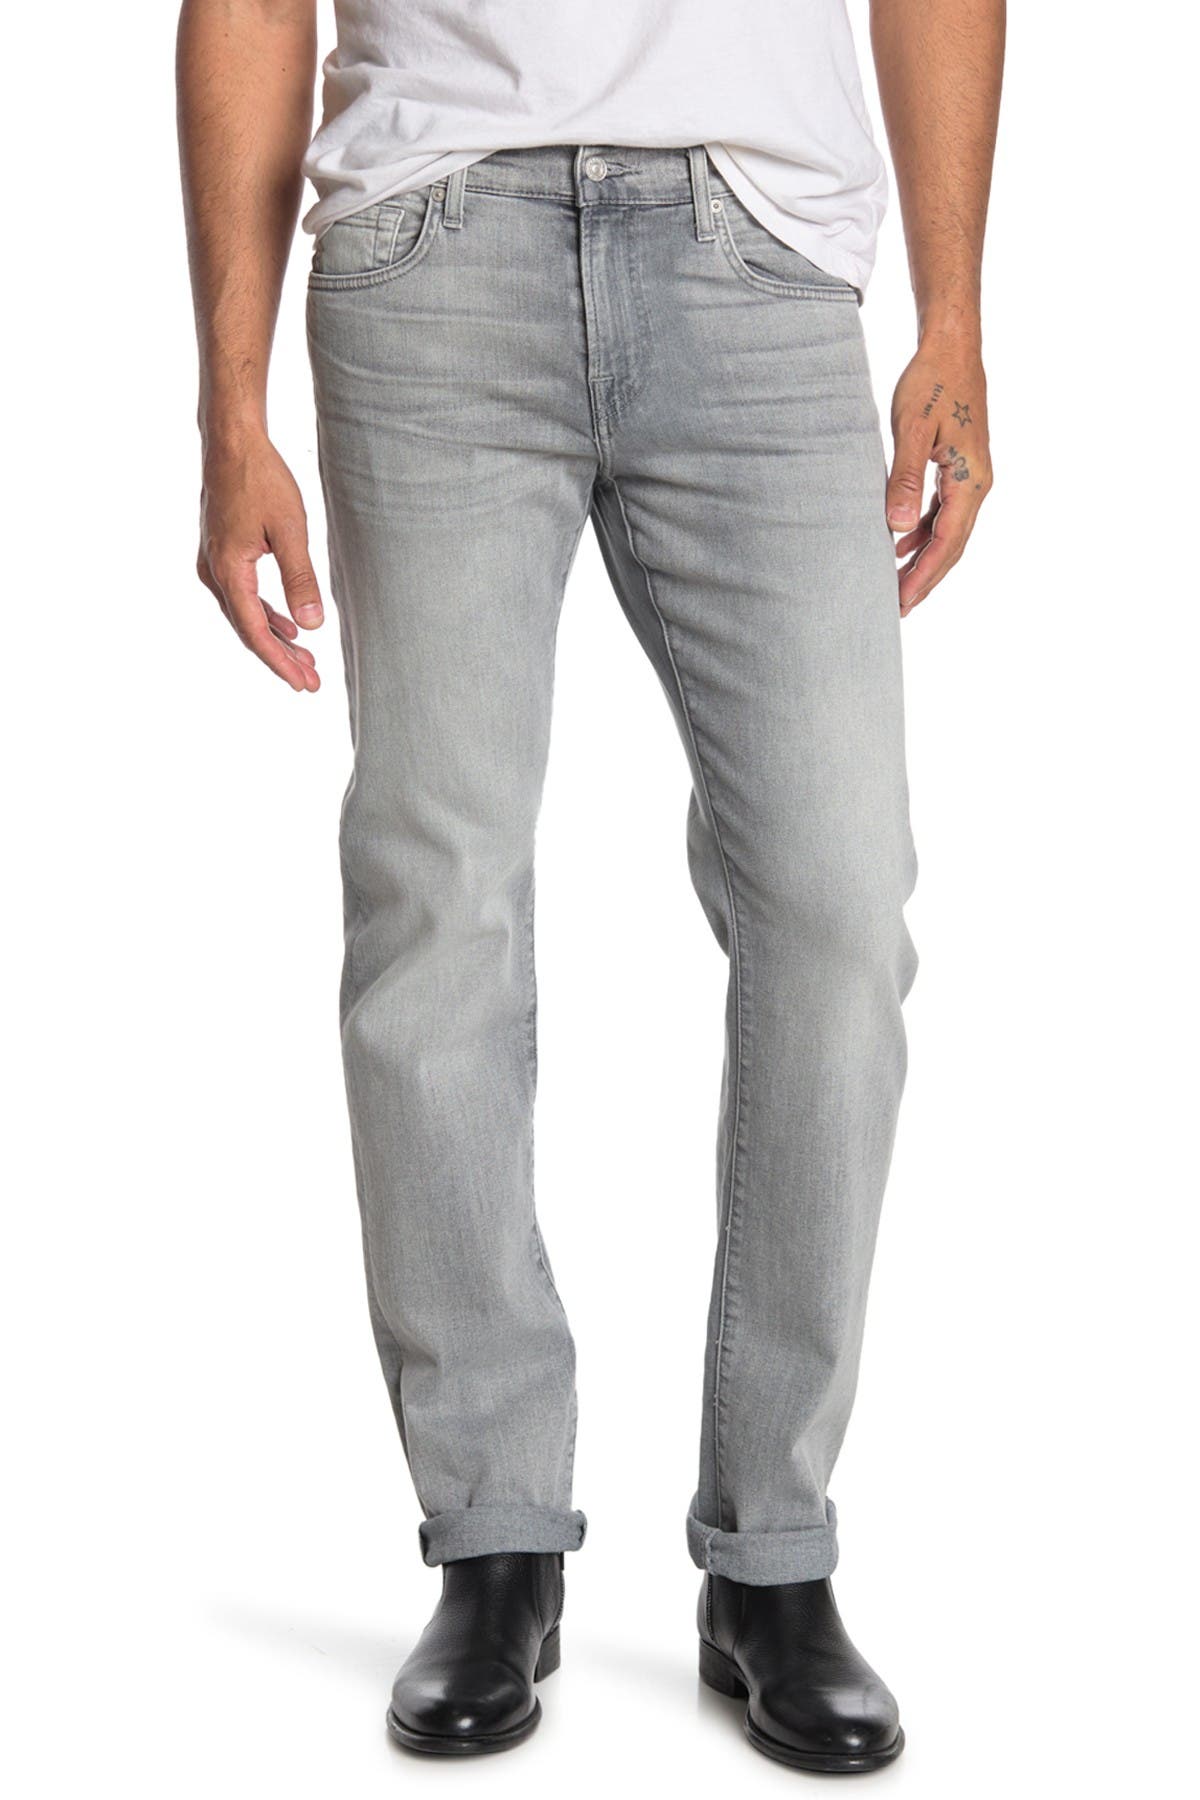 7 For All Mankind Slimmy Slim Fit Jeans In Dark Grey1